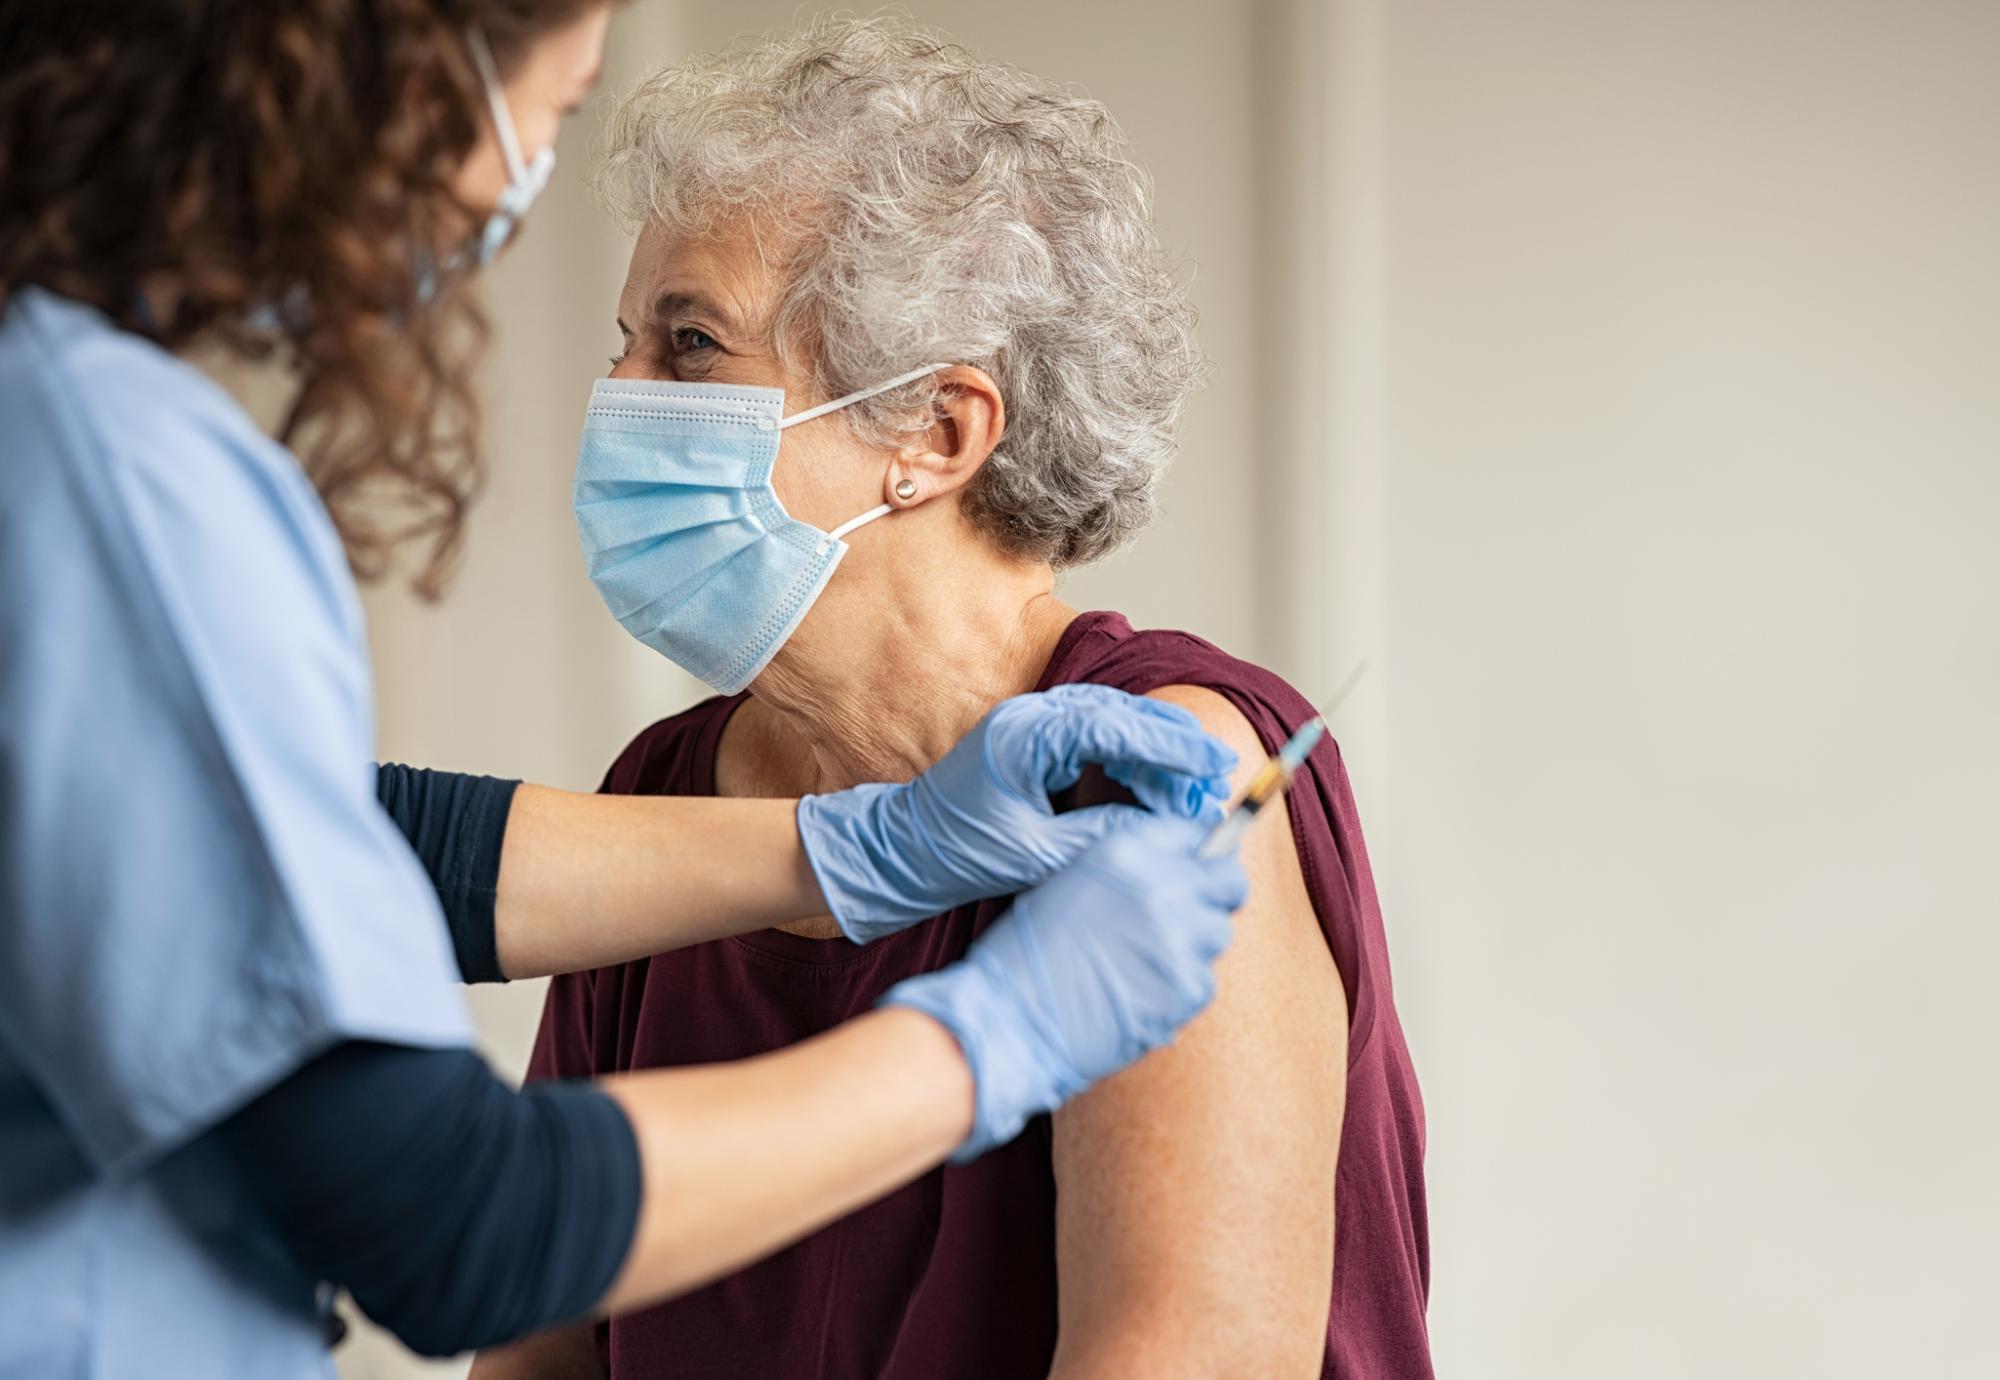 An elderly patient receiving her vaccine jab from a health professional